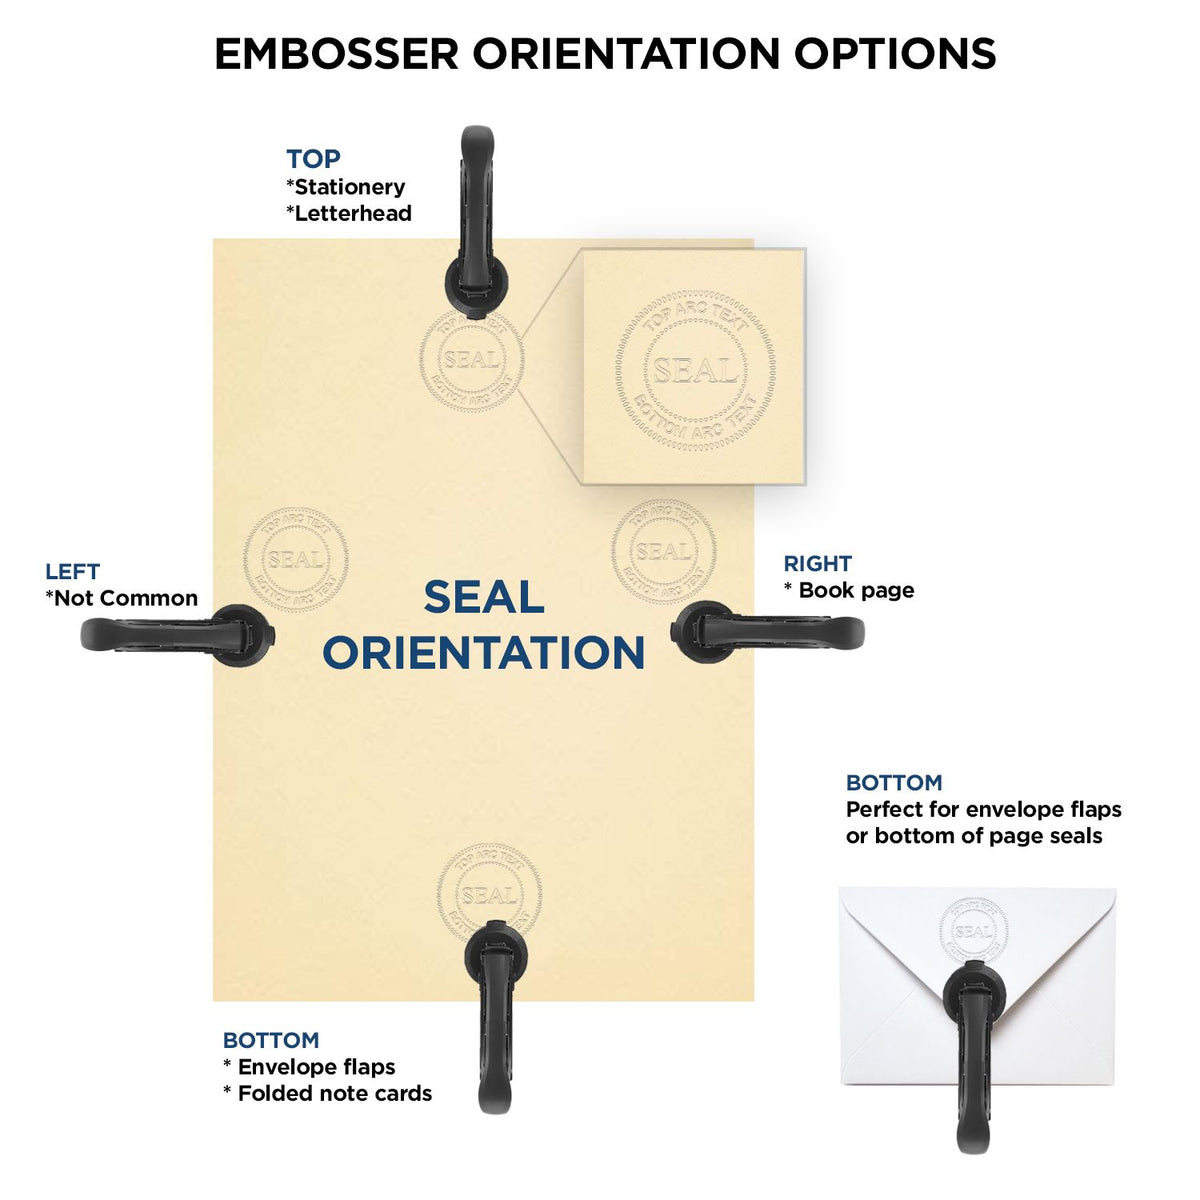 An infographic for the State of Washington Architectural Seal Embosser showing embosser orientation, this is showing examples of a top, bottom, right and left insert.